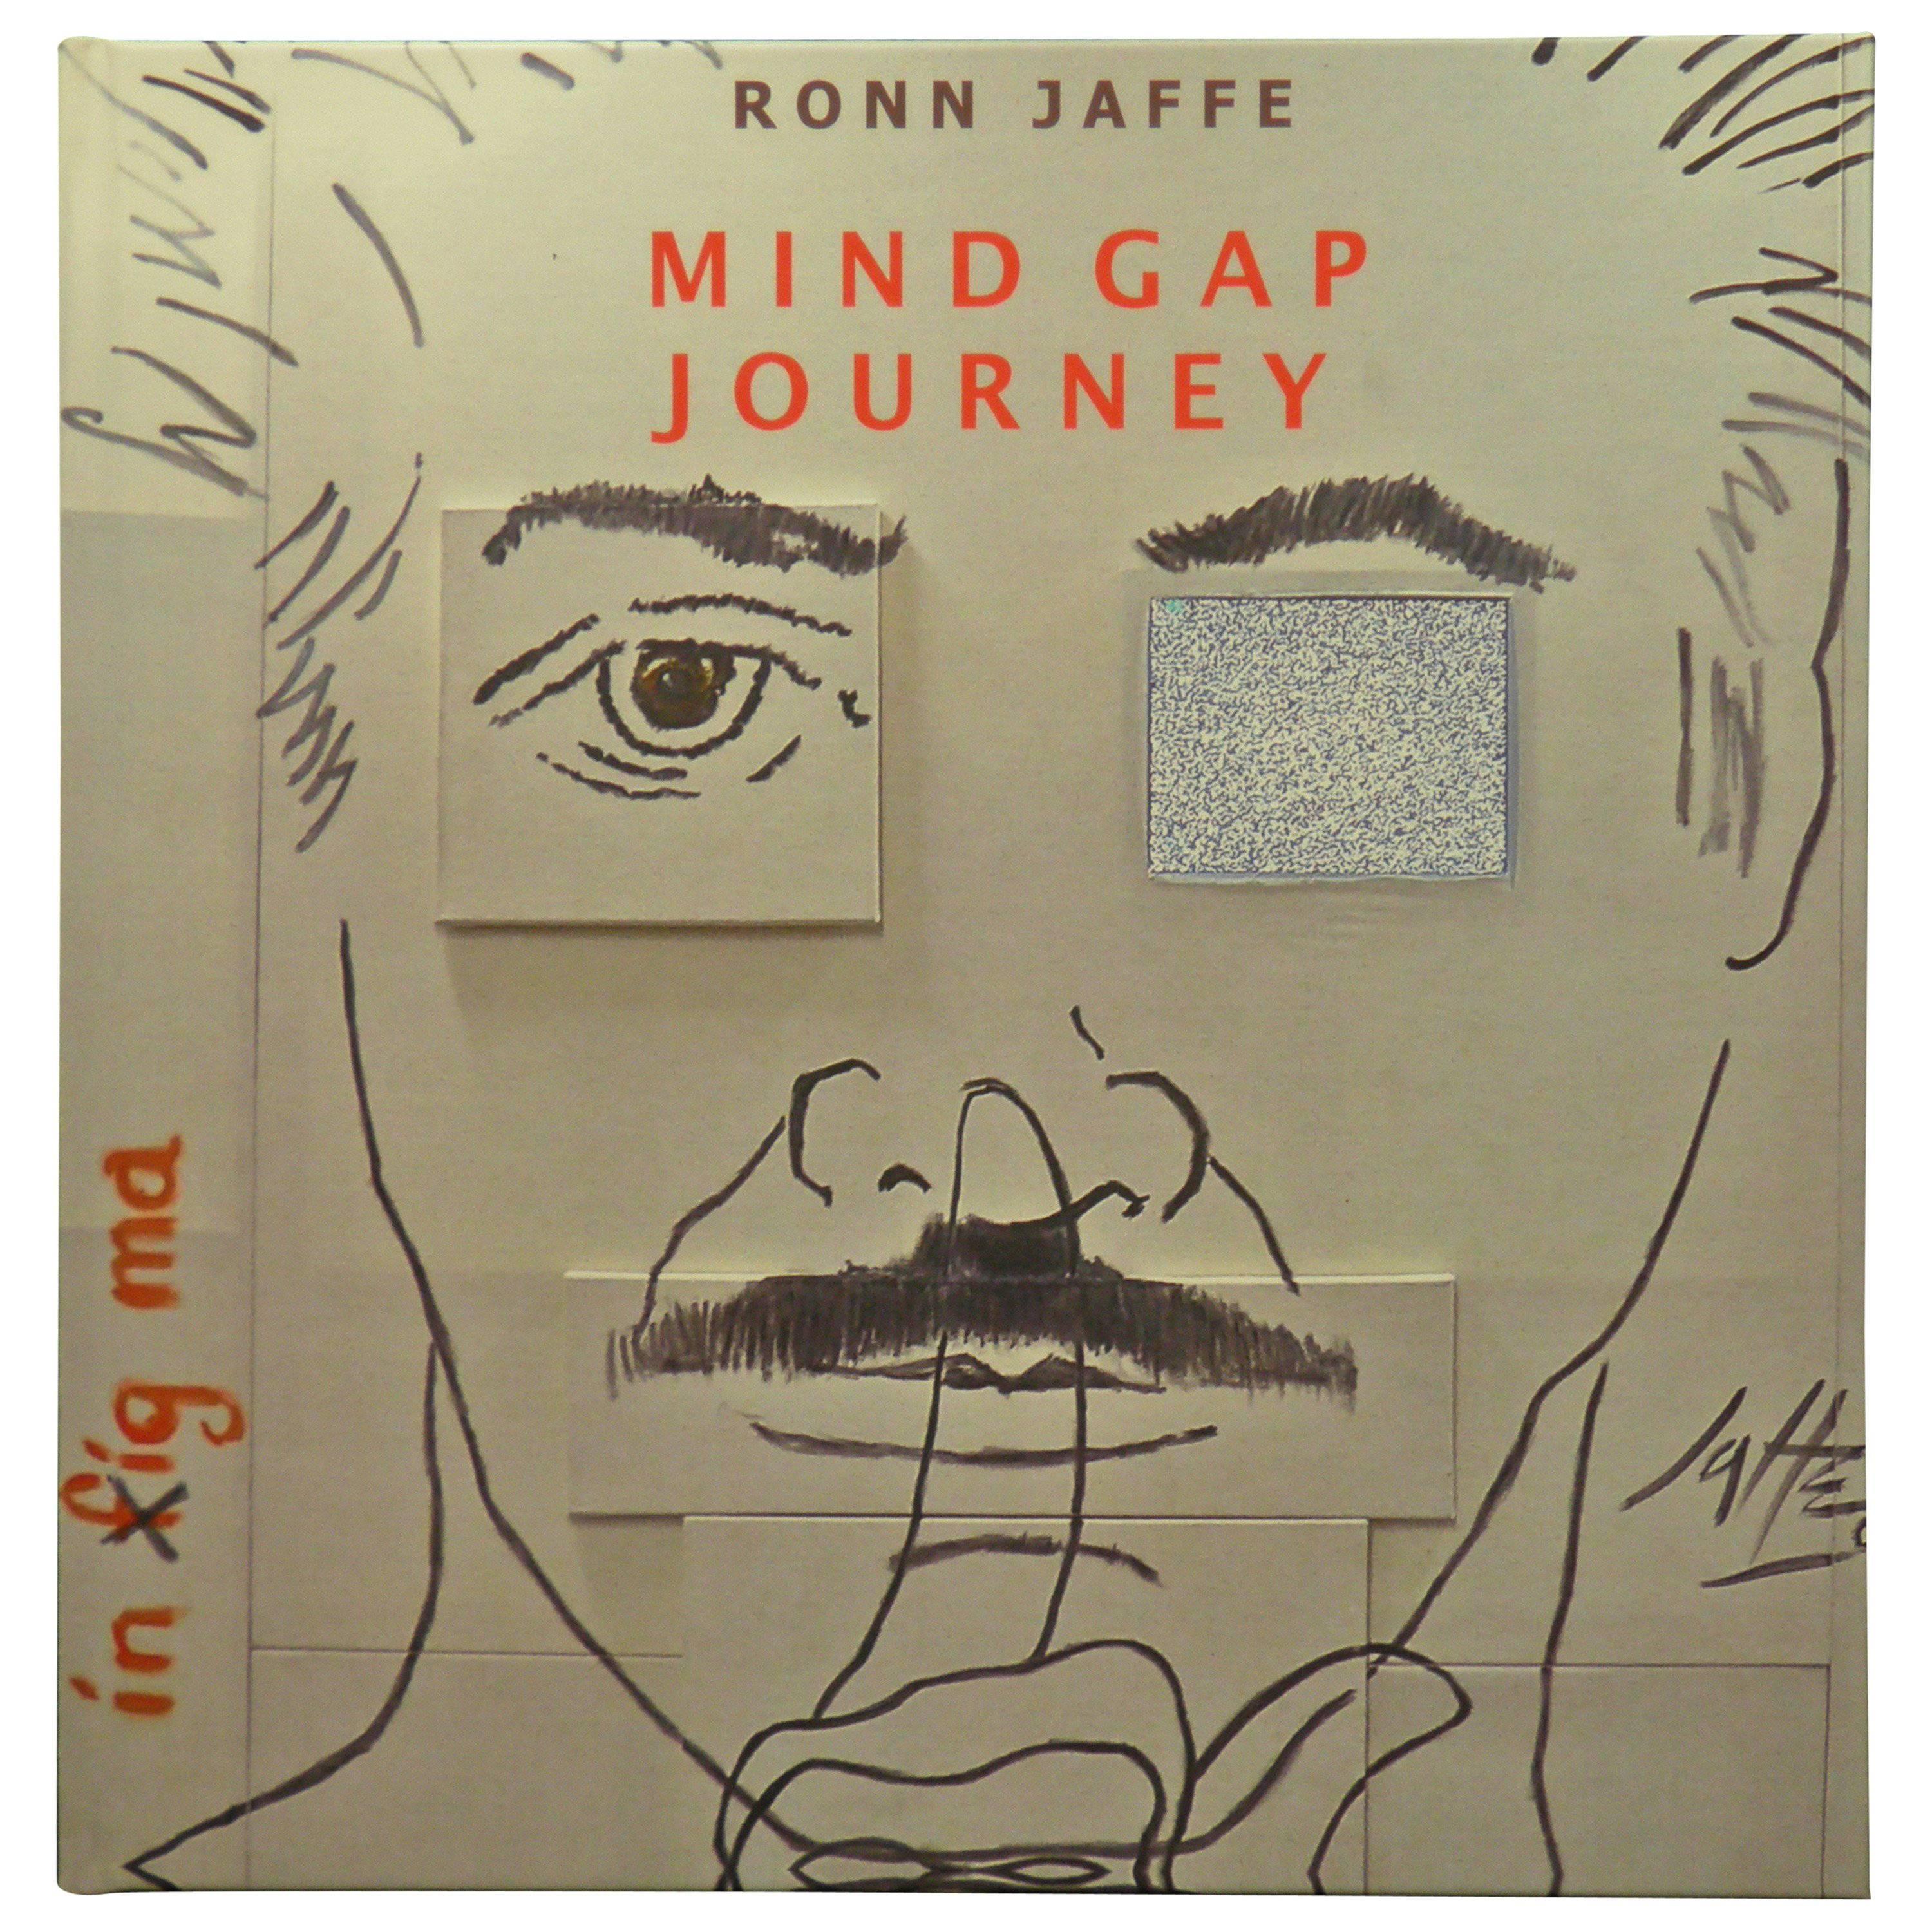 Noted Cutting Edge Artist Ronn Jaffe's Monograph, 'Mind Gap Journey' For Sale